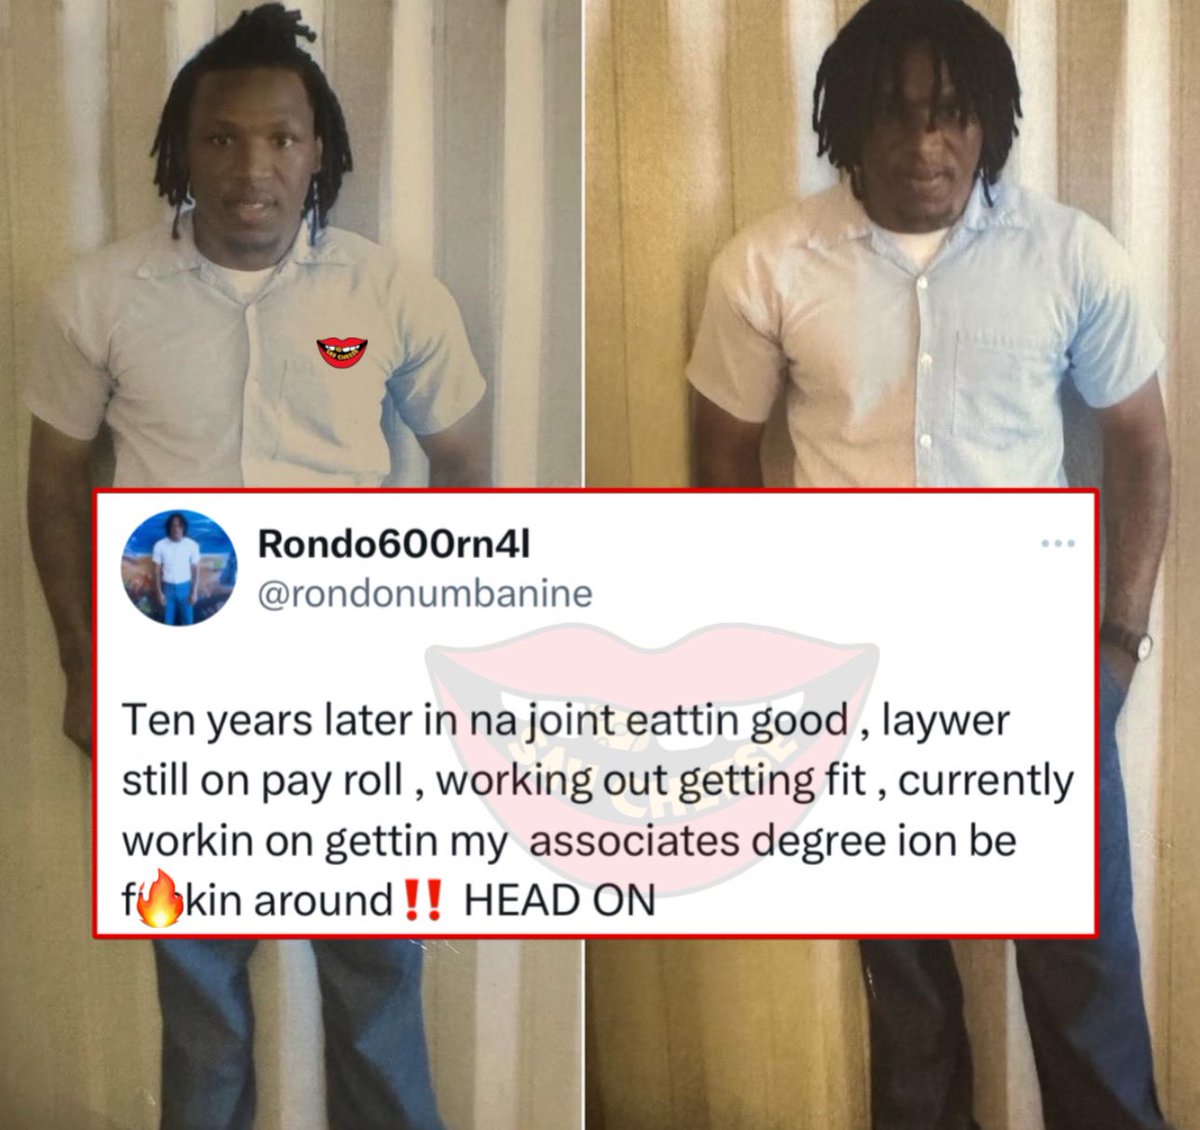 Rondonumbanine reveals he's working on getting his associate’s degree while in prison. He’s scheduled to be released in the year 2056